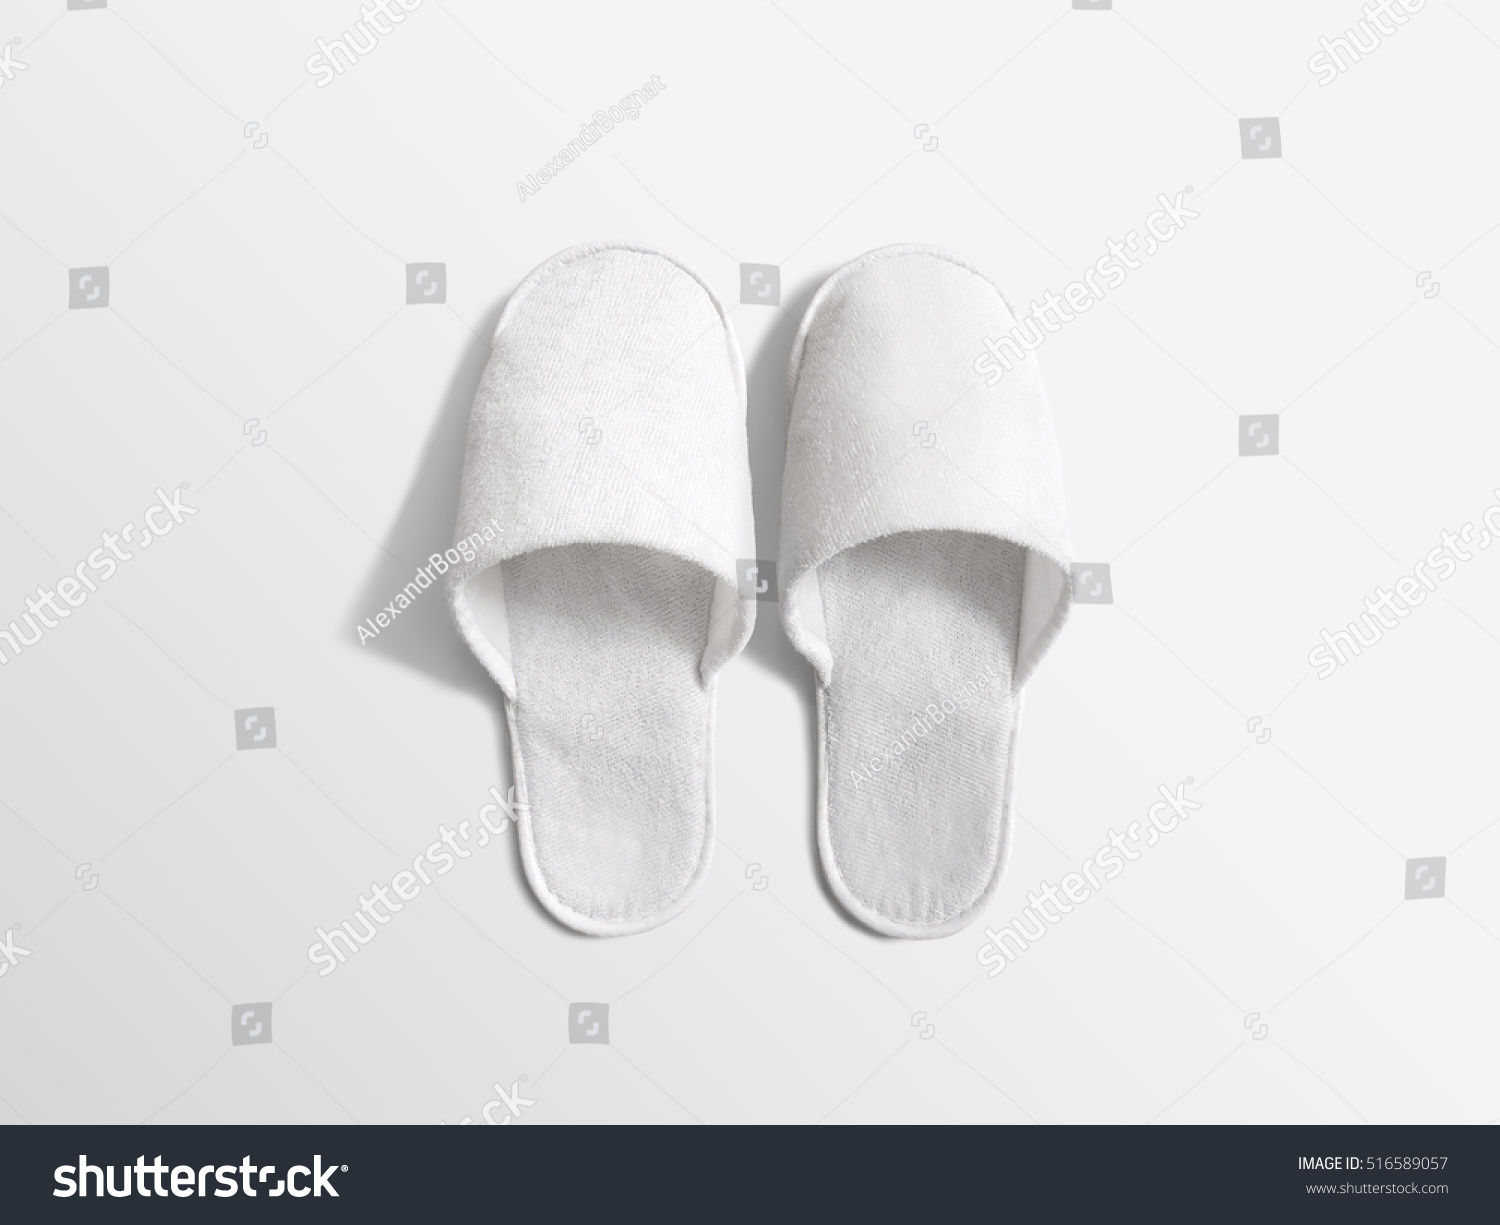 Download Pair Blank Soft White Home Slippers Stock Photo 516589057 ...